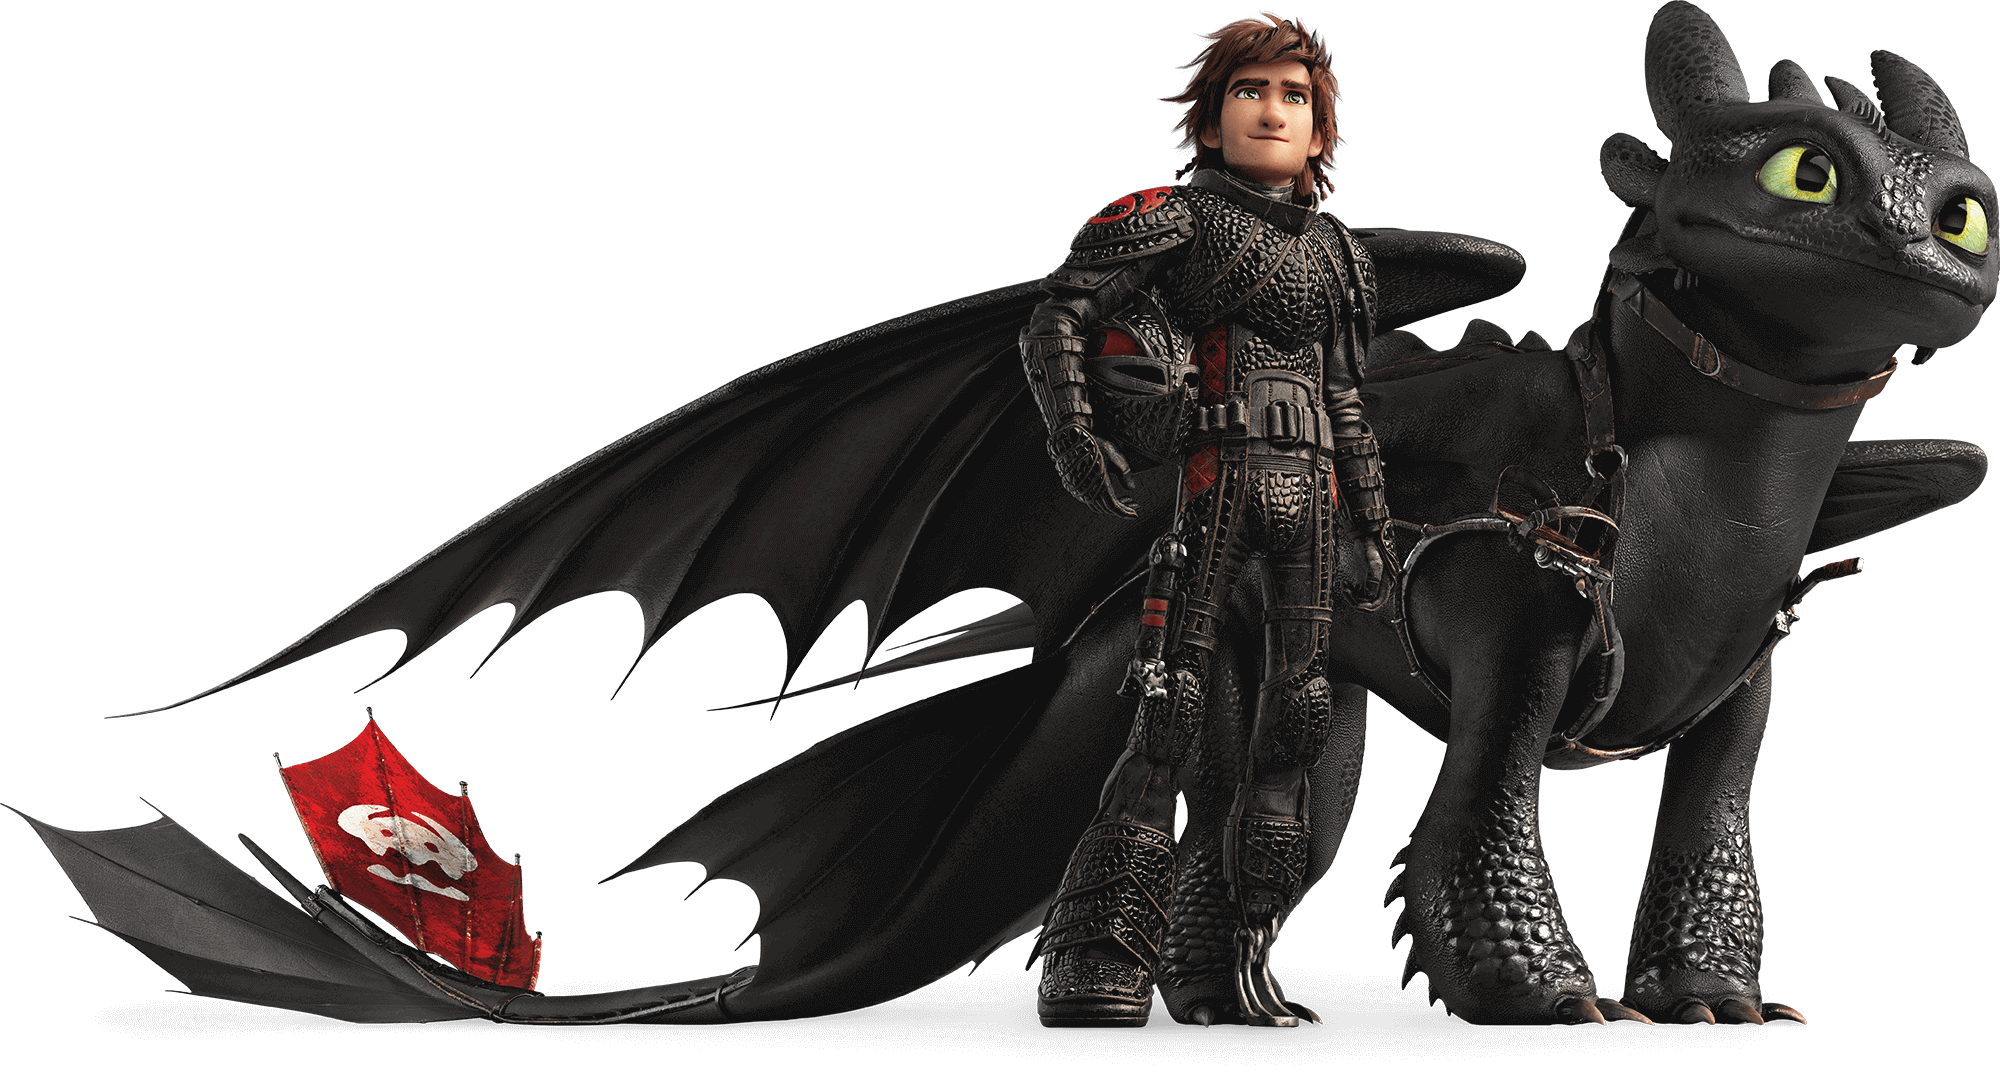 Fury Toothless Night HD Image Free PNG Image